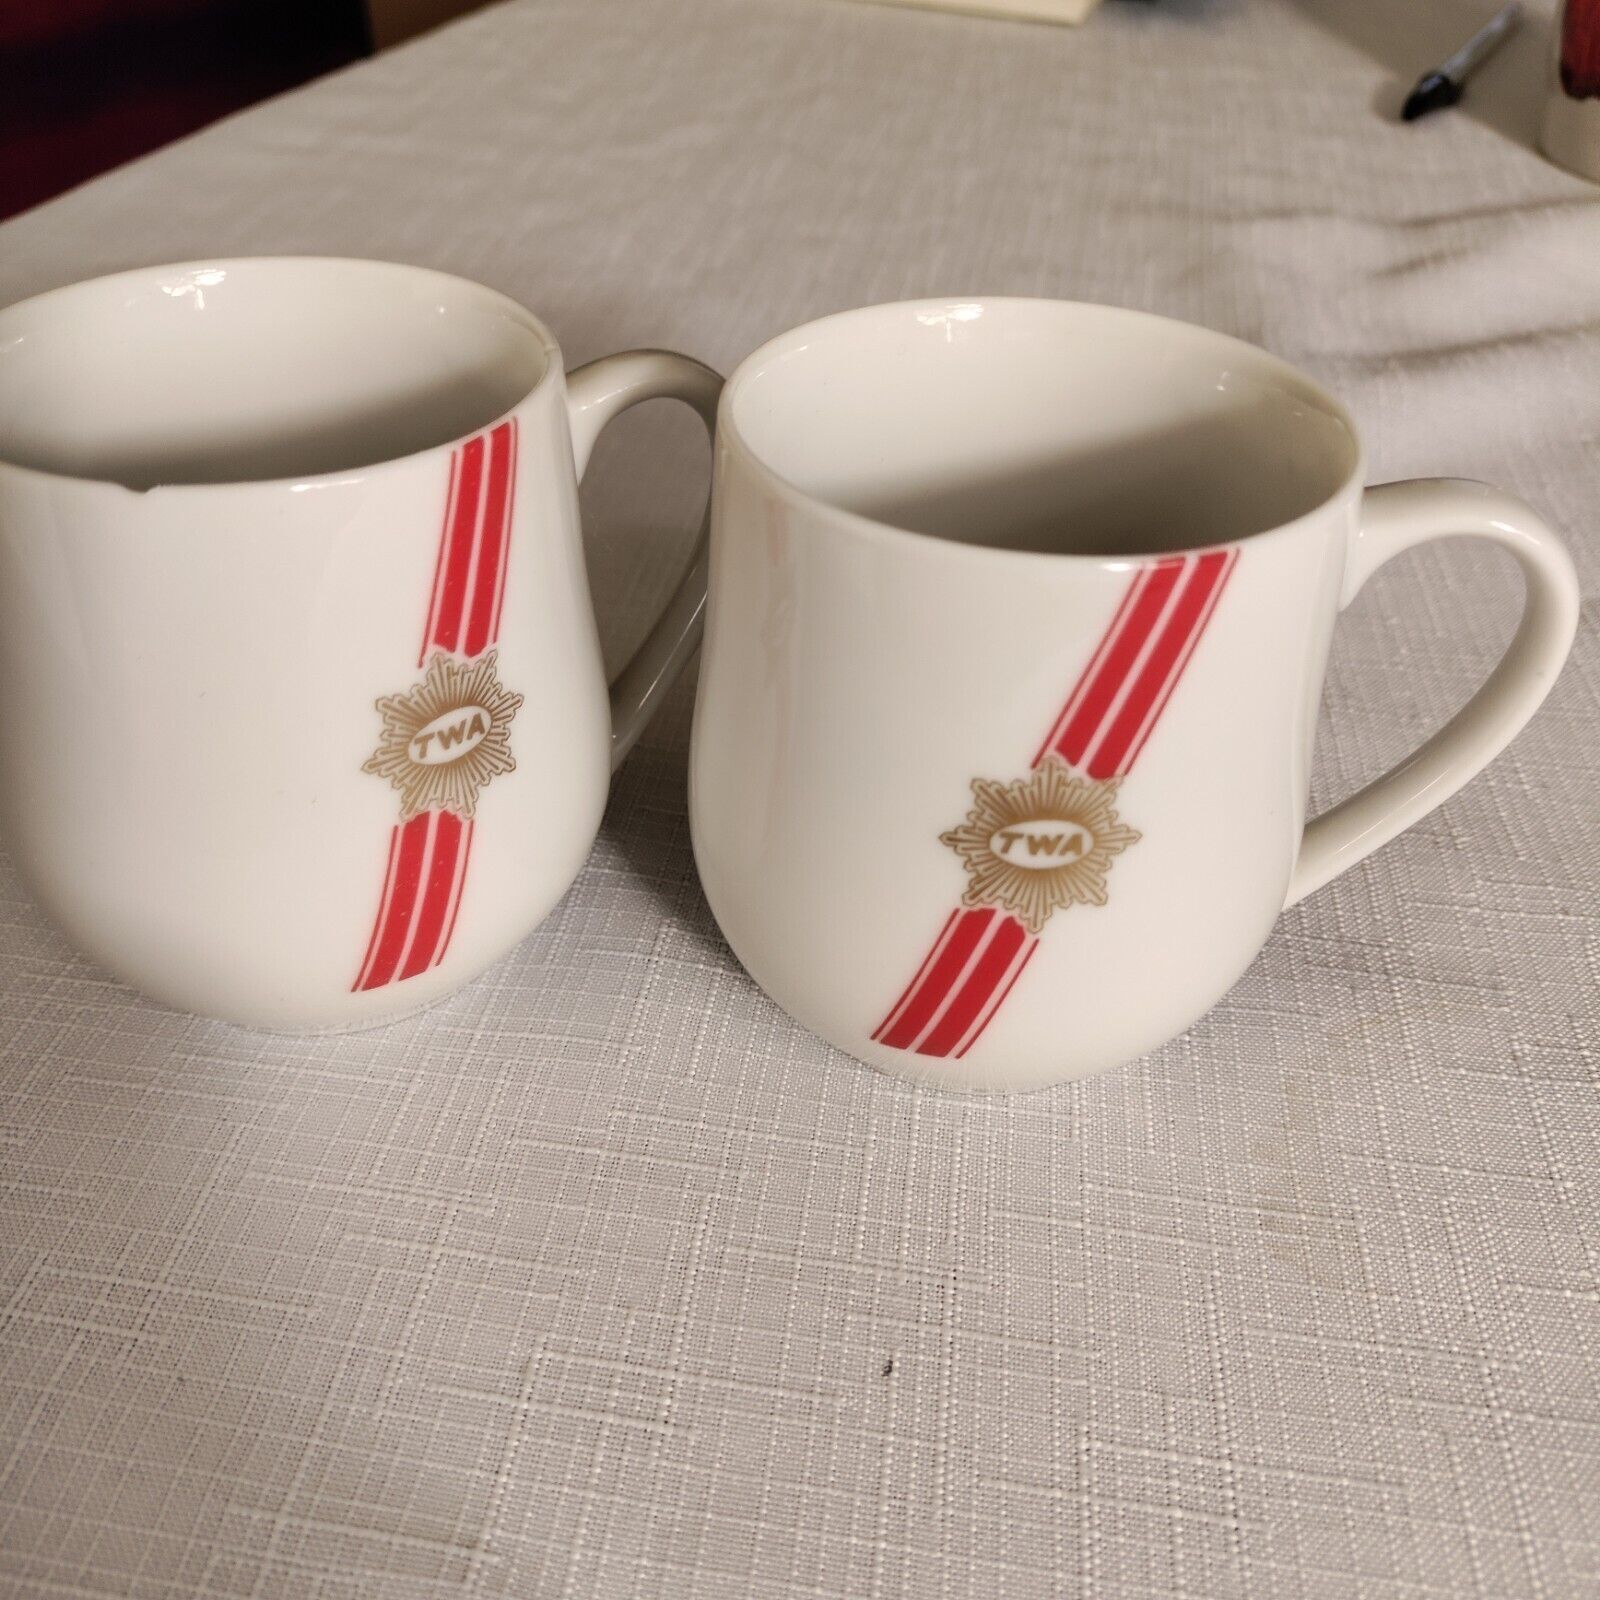 TWA GOLD LOGO, RED RACKET  White Coffee MUG Espresso Airlines Cups (2) - Damaged